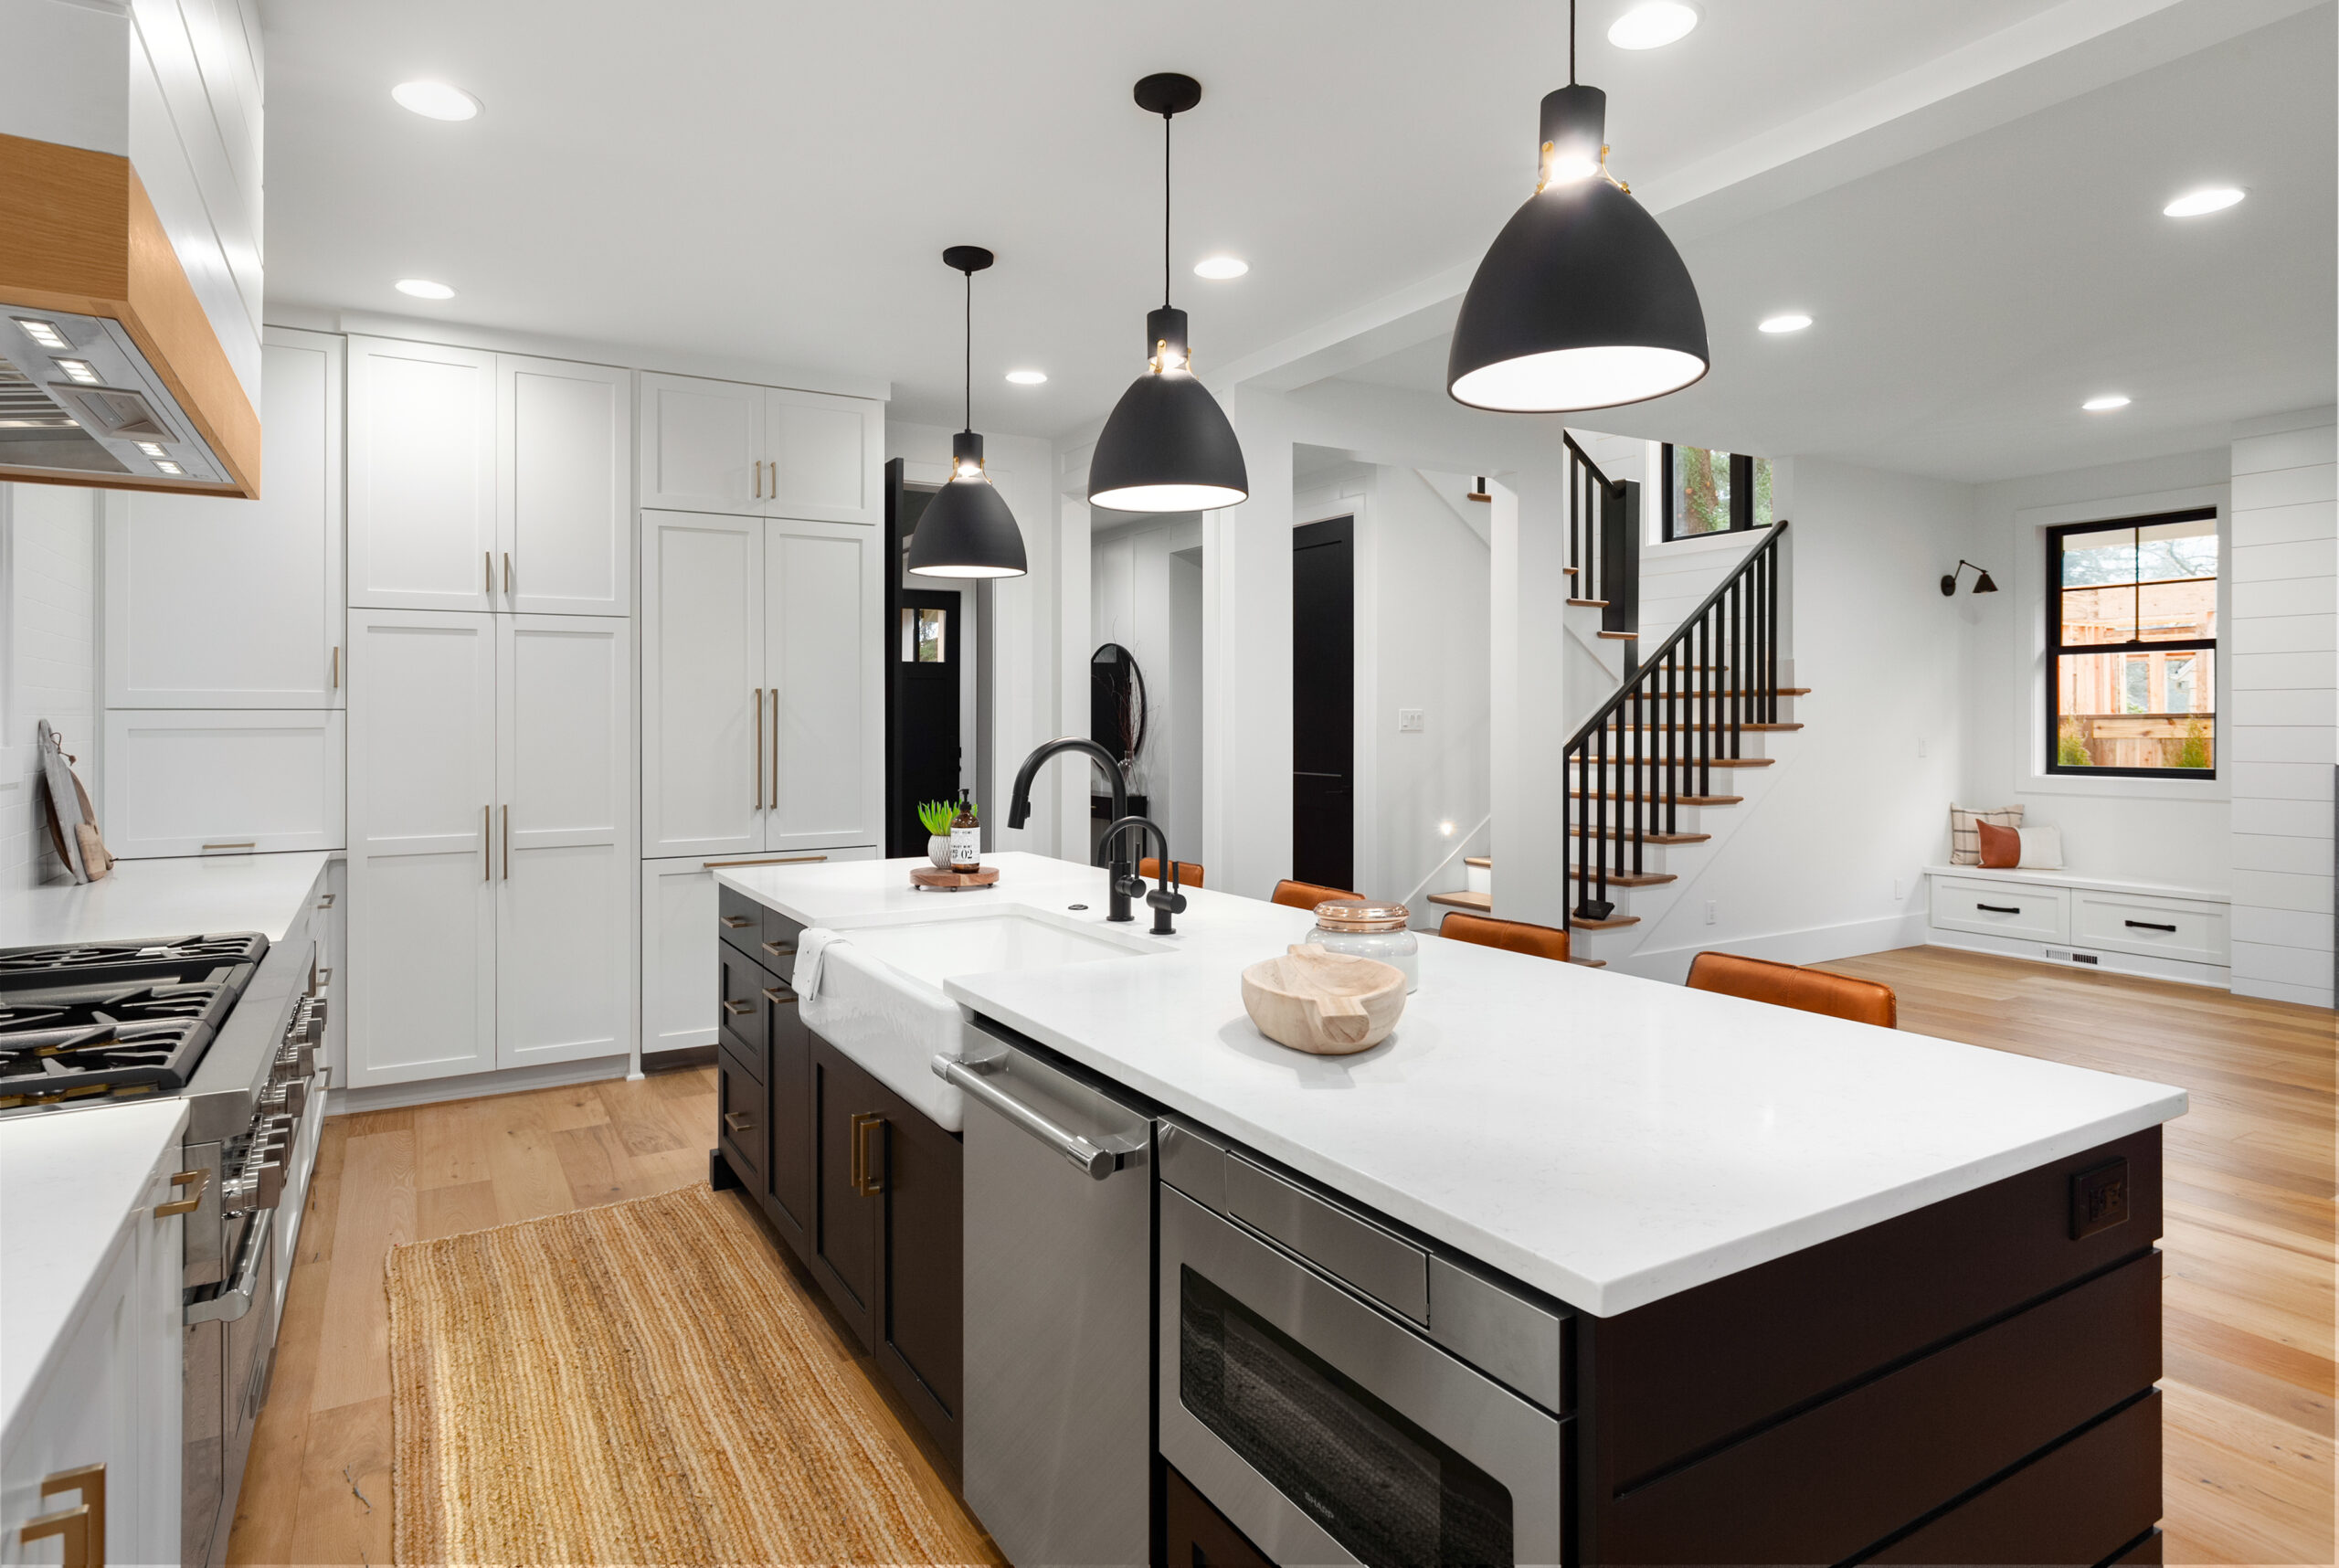 DCON Renovations Premier Kitchen Remodeling Contractor in Brooklyn & NYC